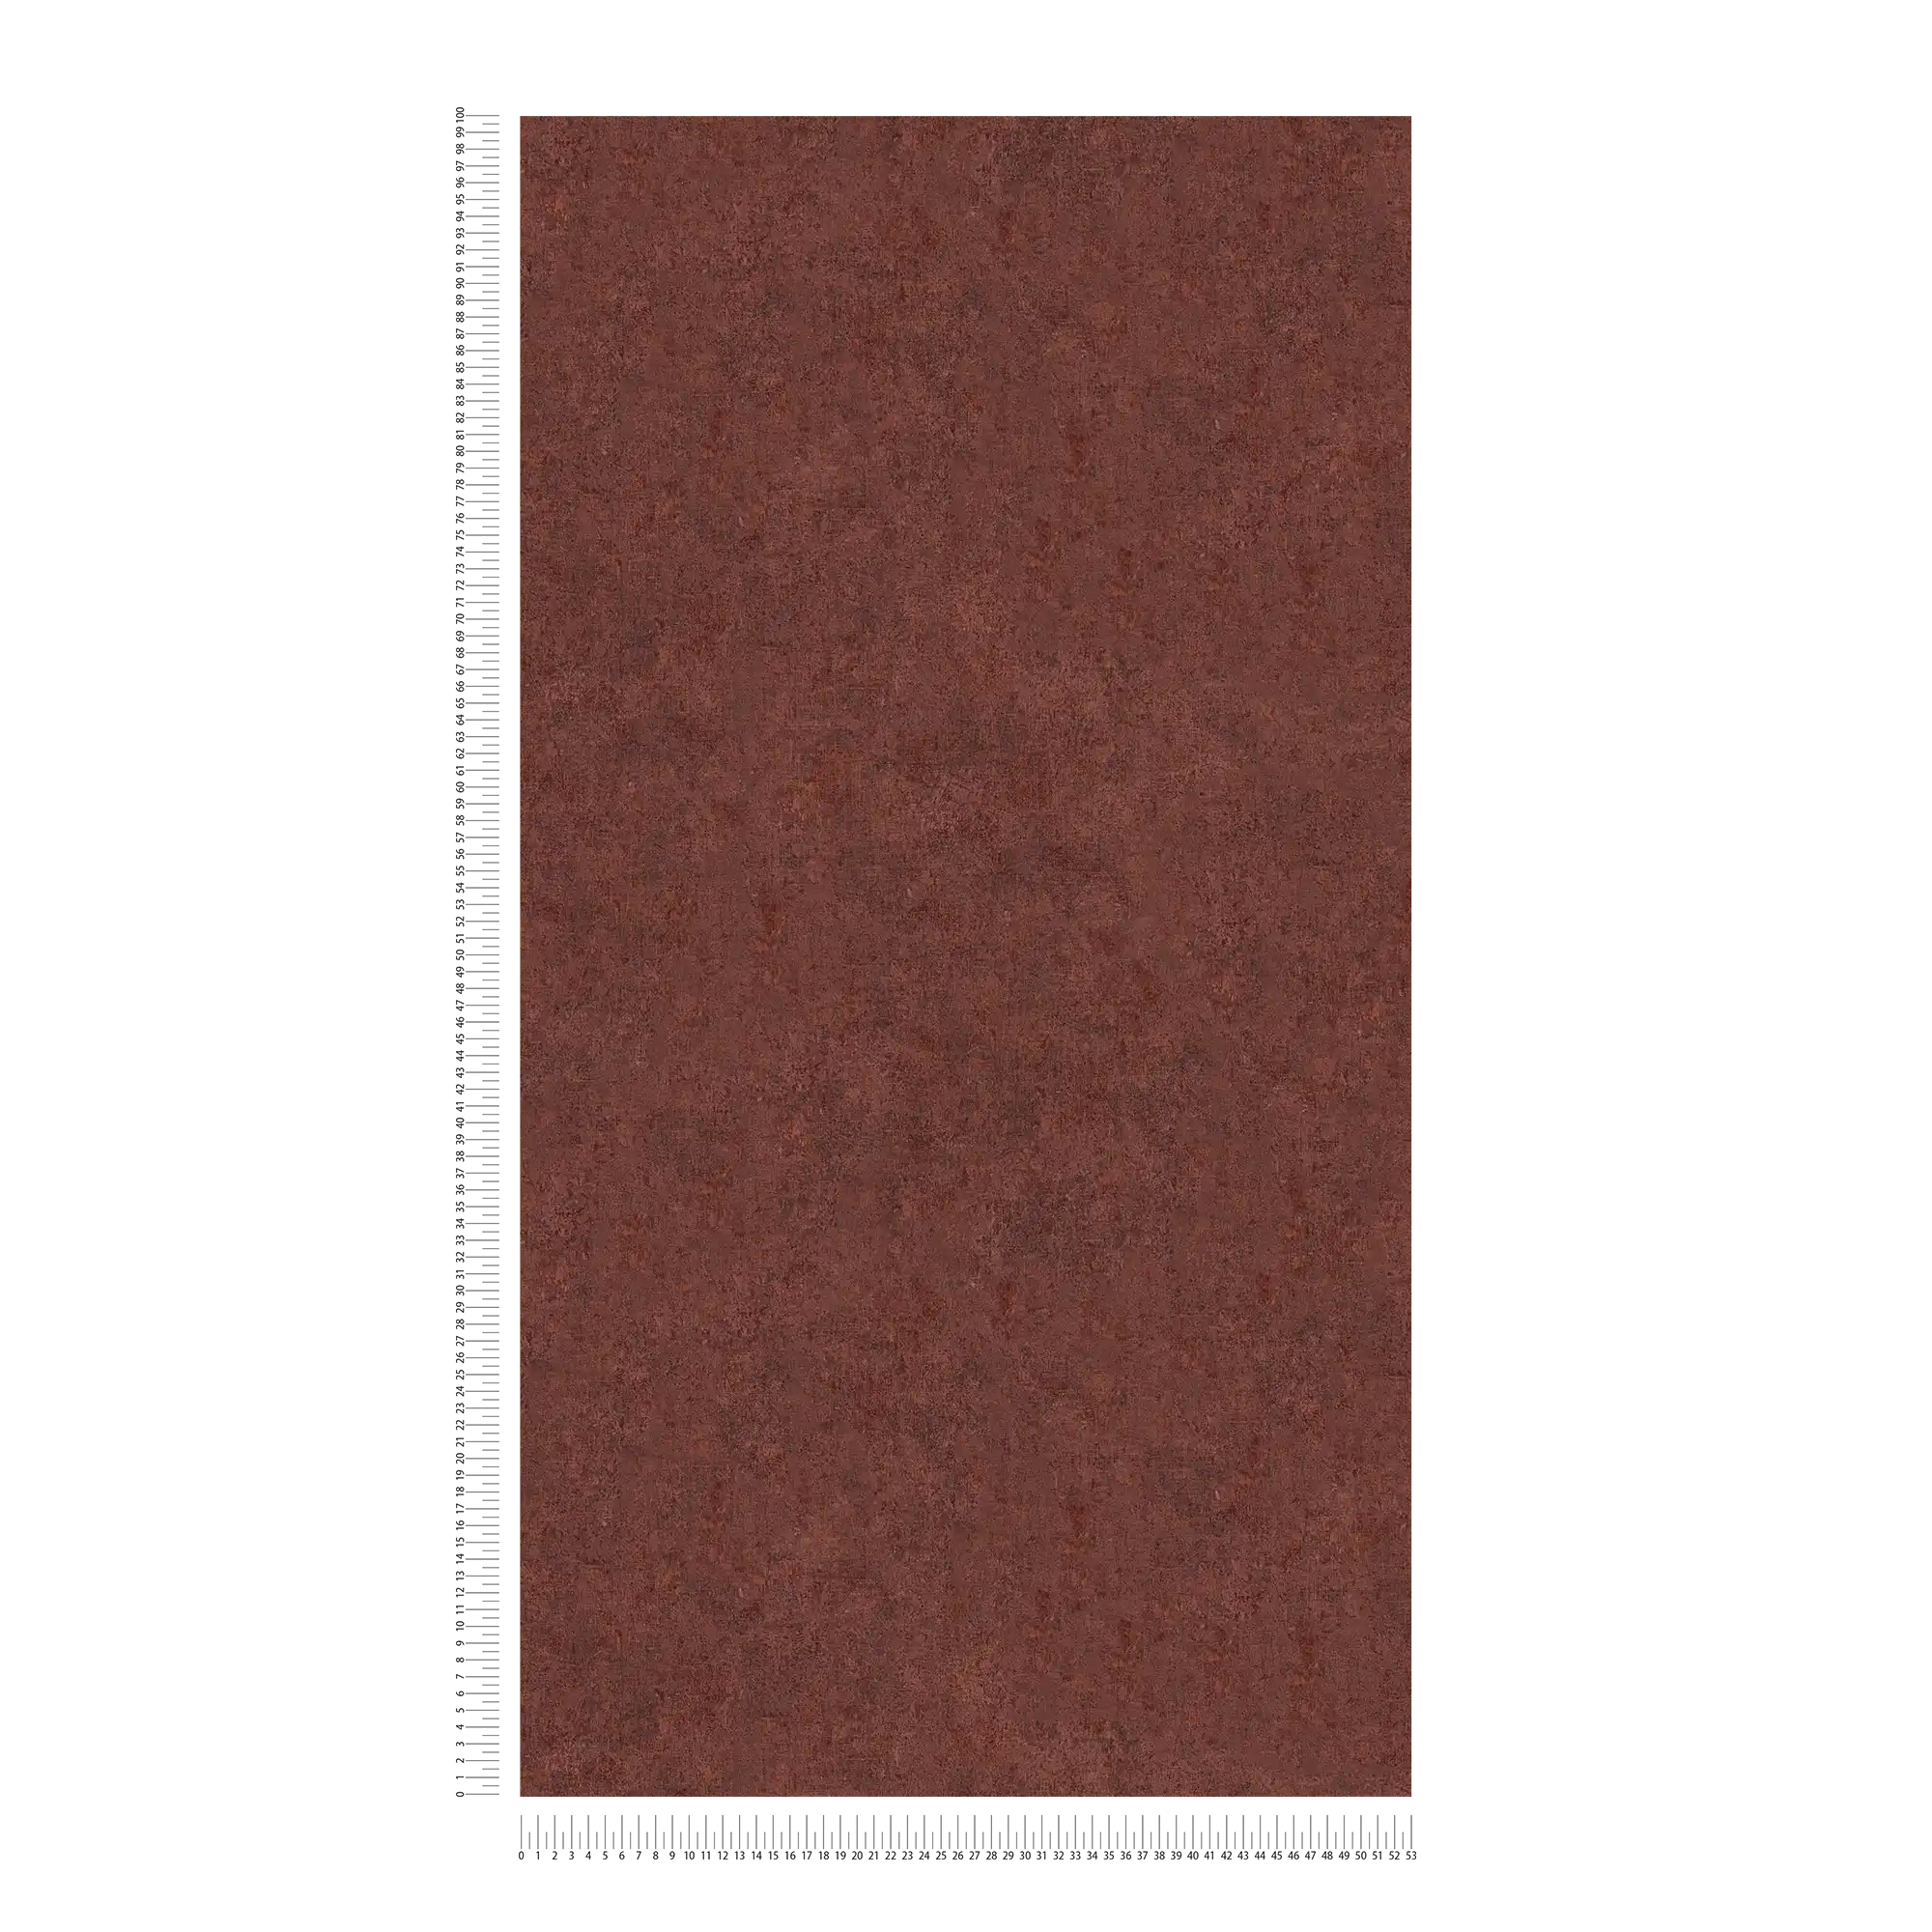             Non-woven wallpaper plains with colour pattern & vintage look - red
        